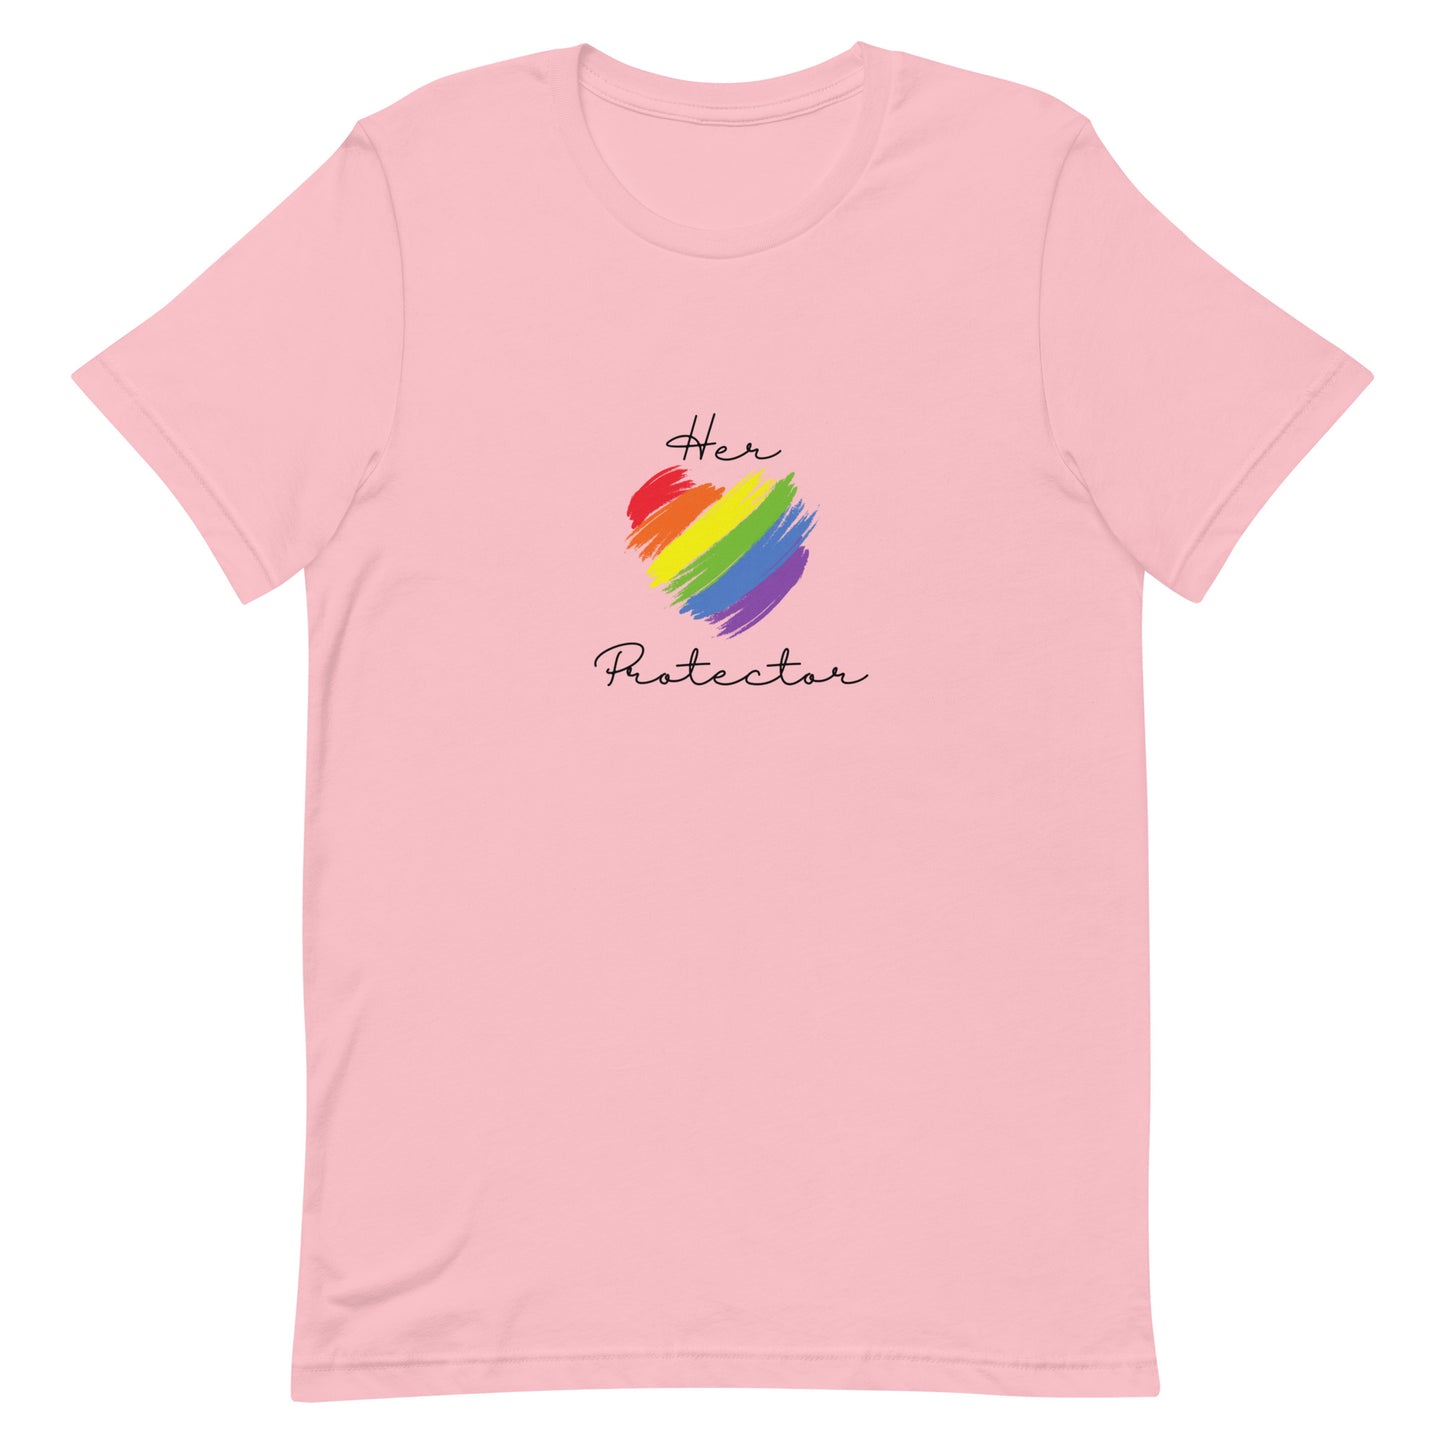 Her Protector (Pride) - Unisex t-shirt